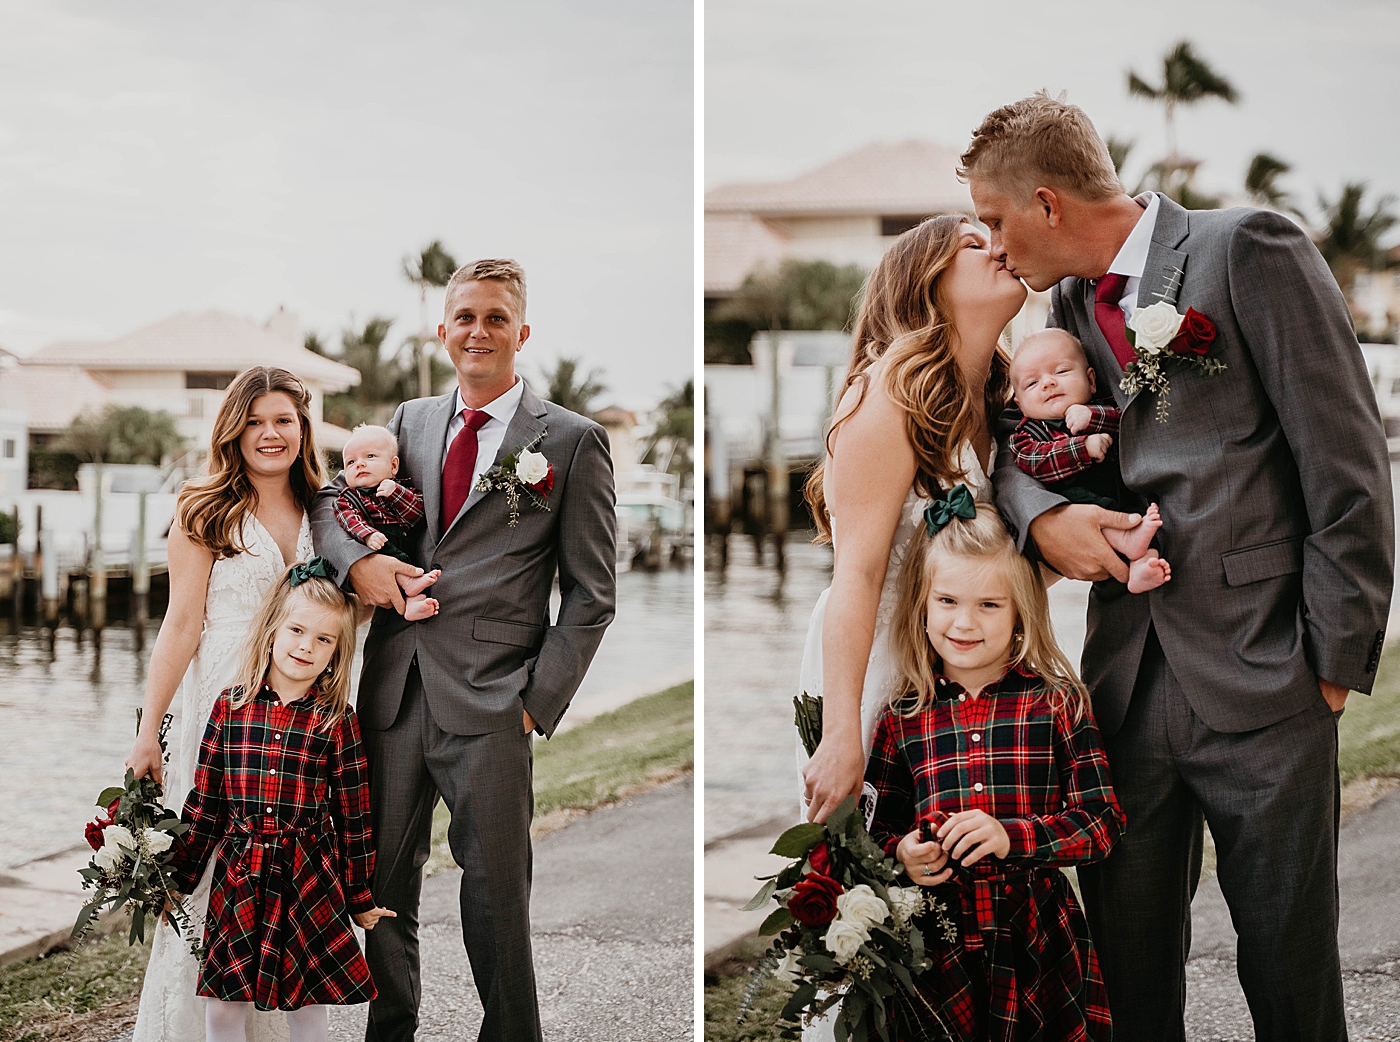 Bride and Groom with children Portraits South Florida Elopement Photography captured by Krystal Capone Photography